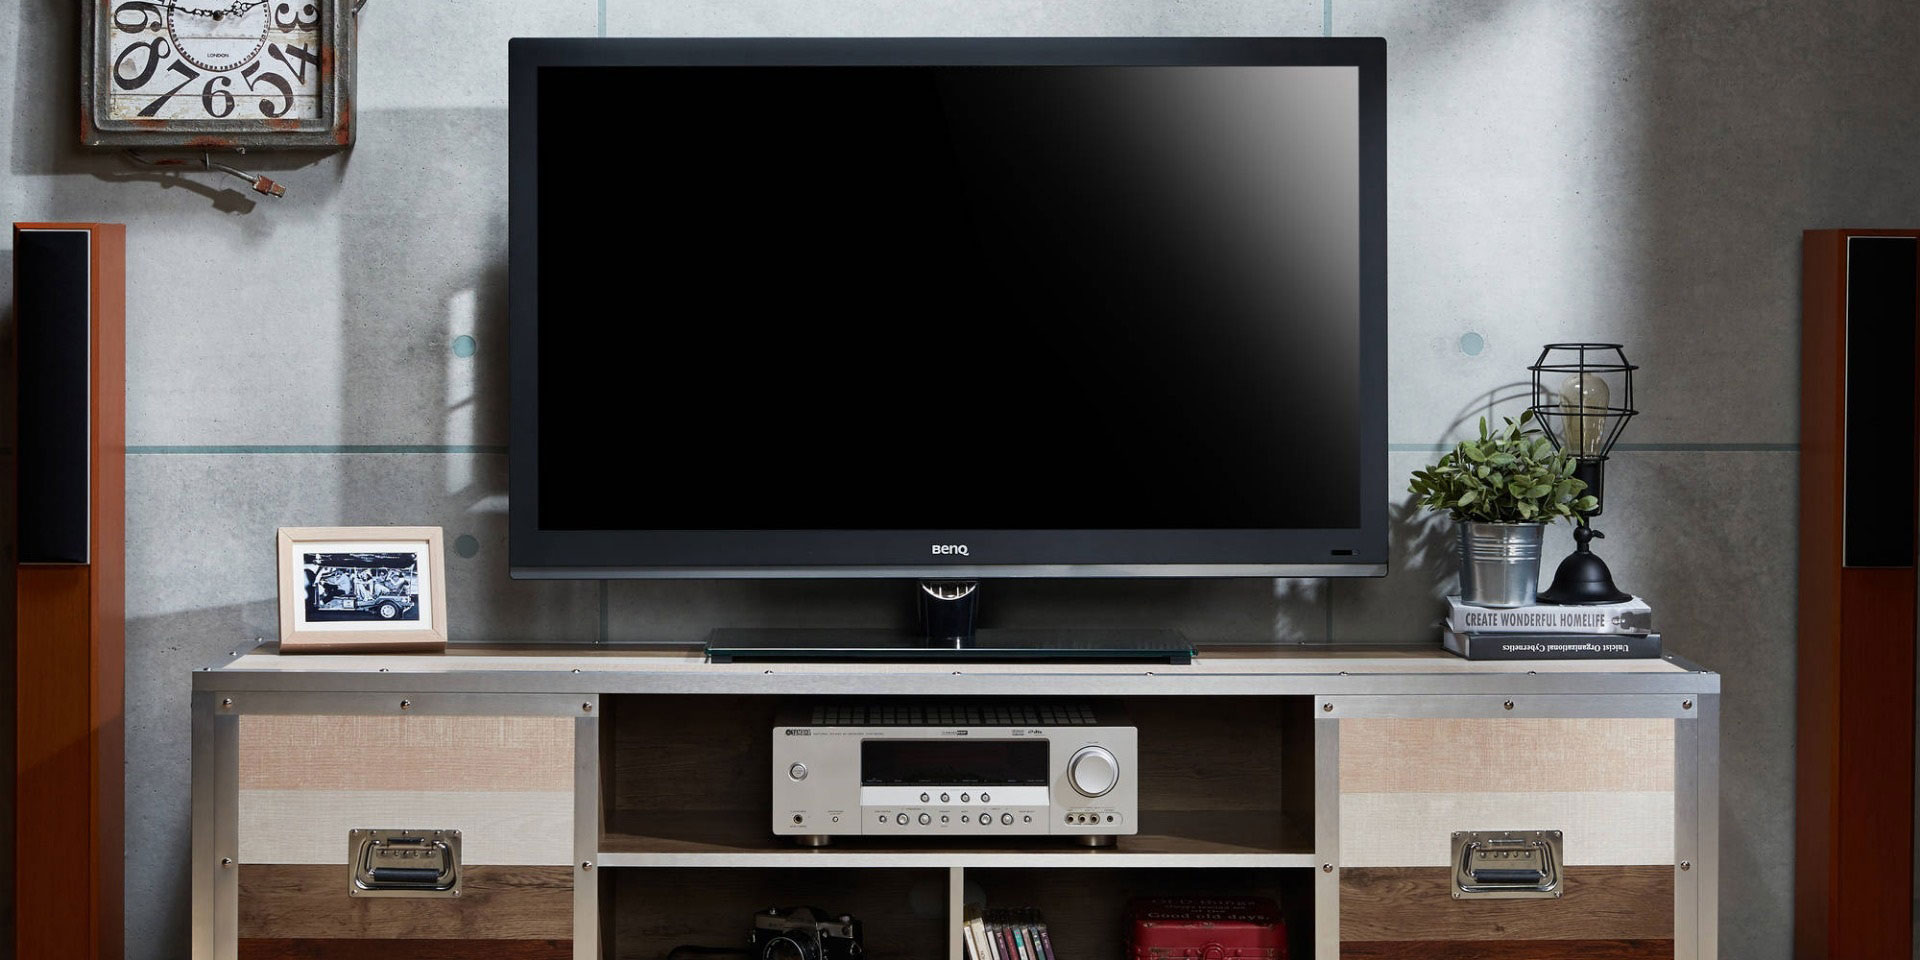 How To Connect An AV Receiver To A TV